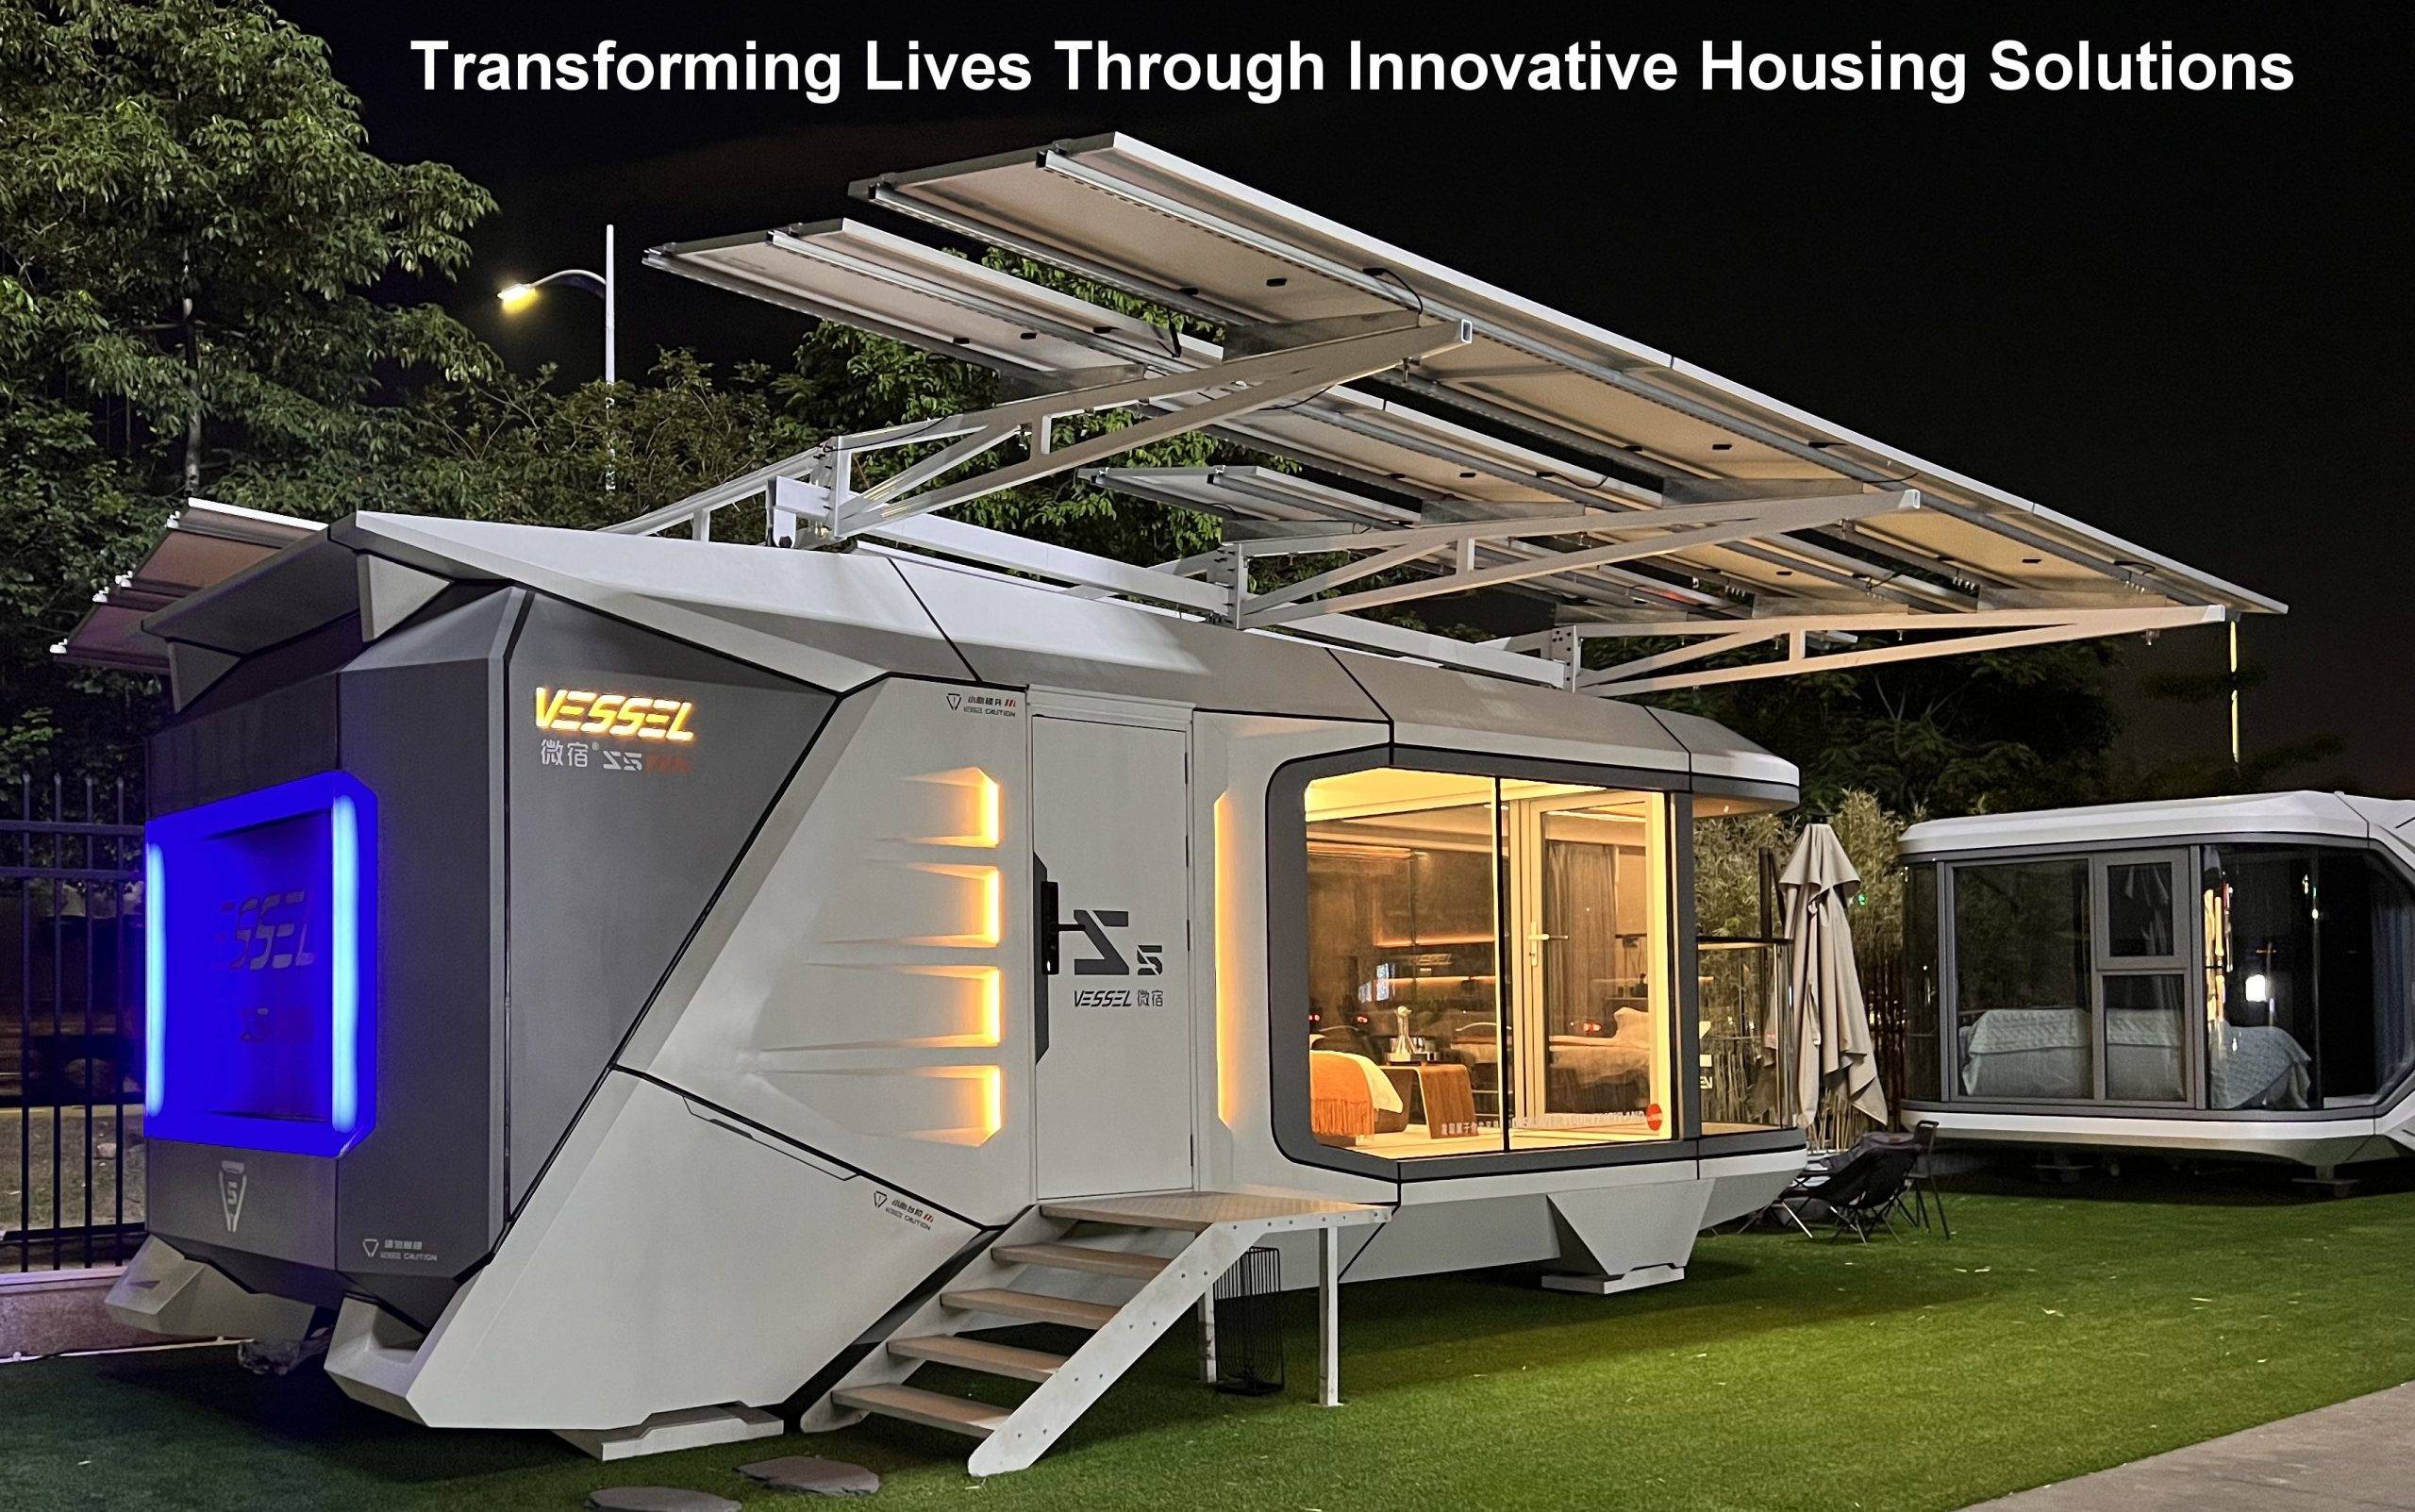 Homes 4 the Homeless - Transforming Lives Through Innovative Housing Solutions